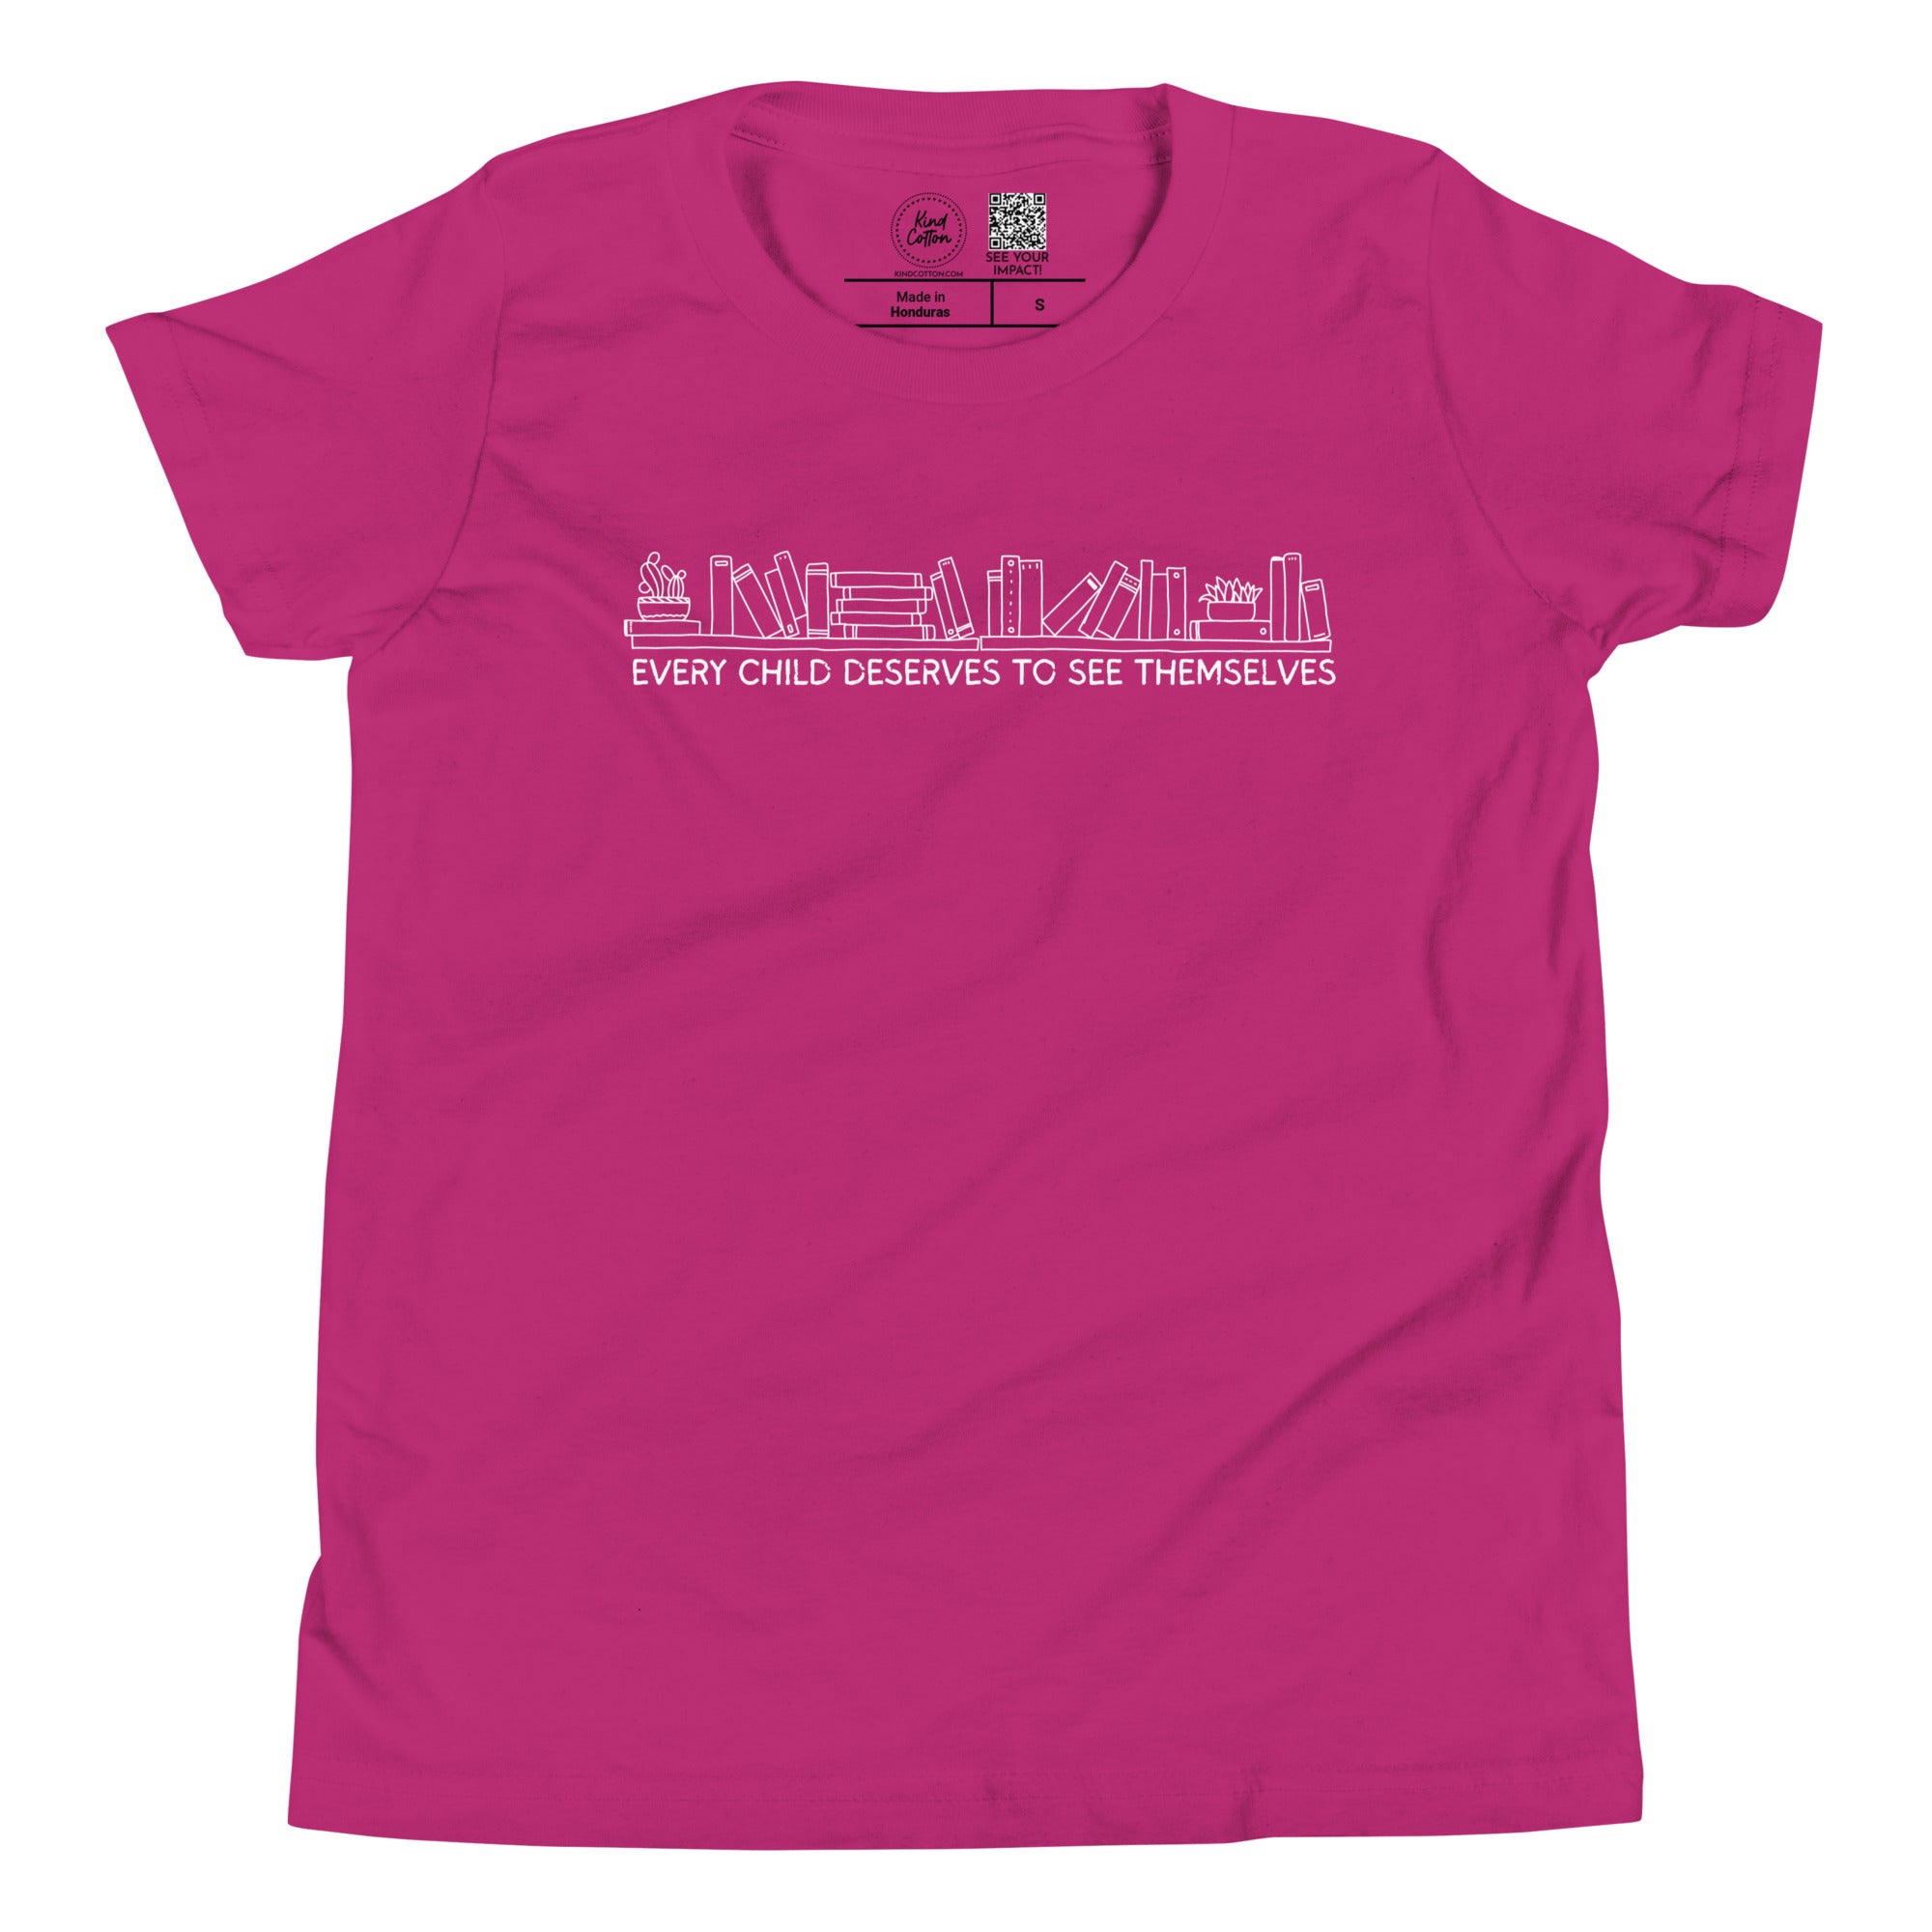 Every Child Deserves to See Themselves Kids Tee